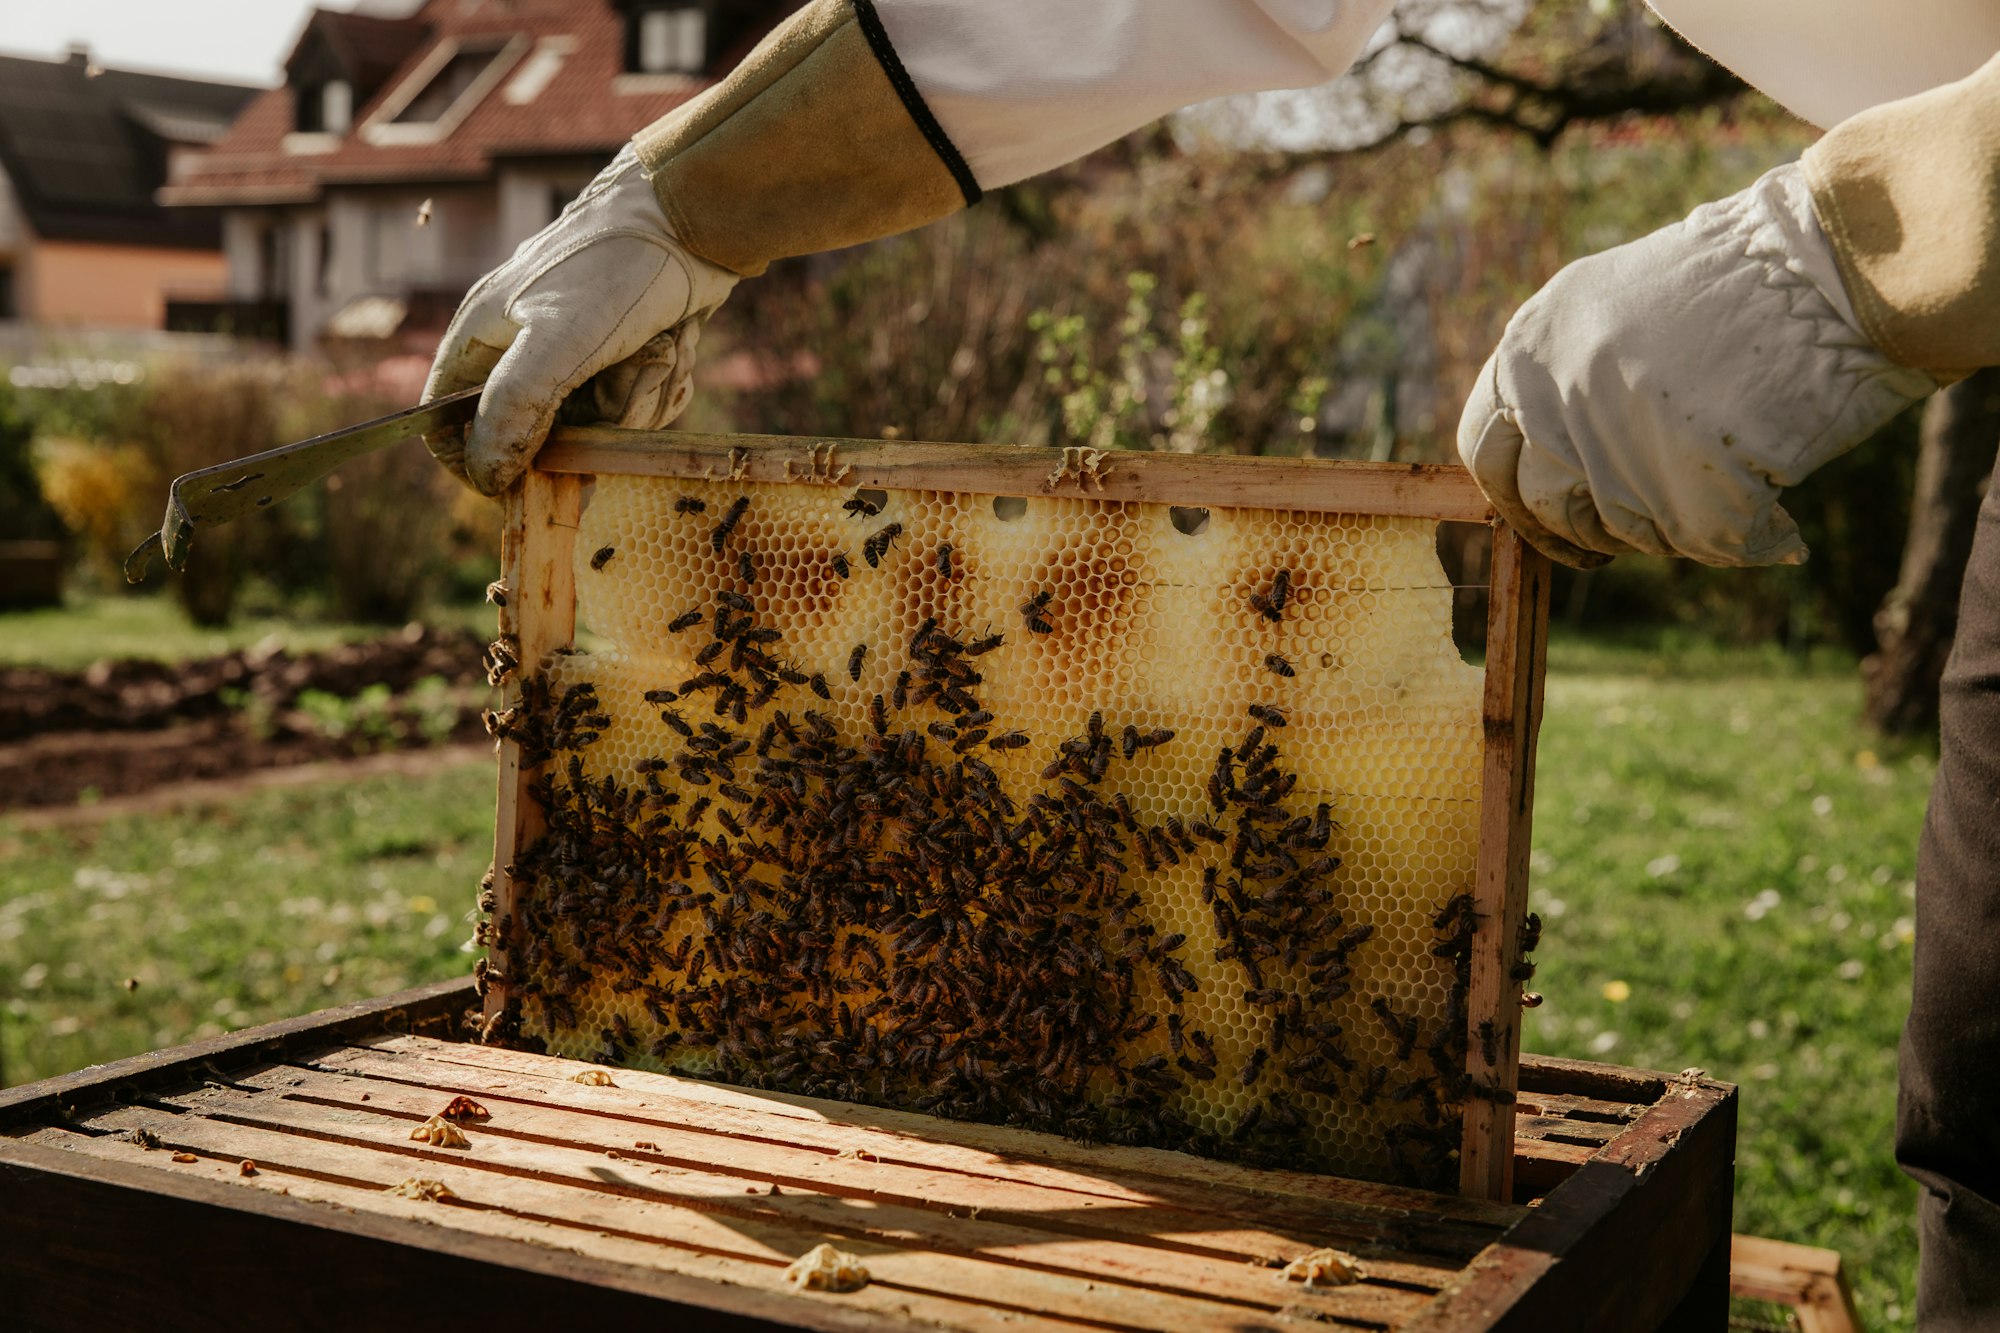 Apiculture, or beekeeping, letting us learn about how bees behave